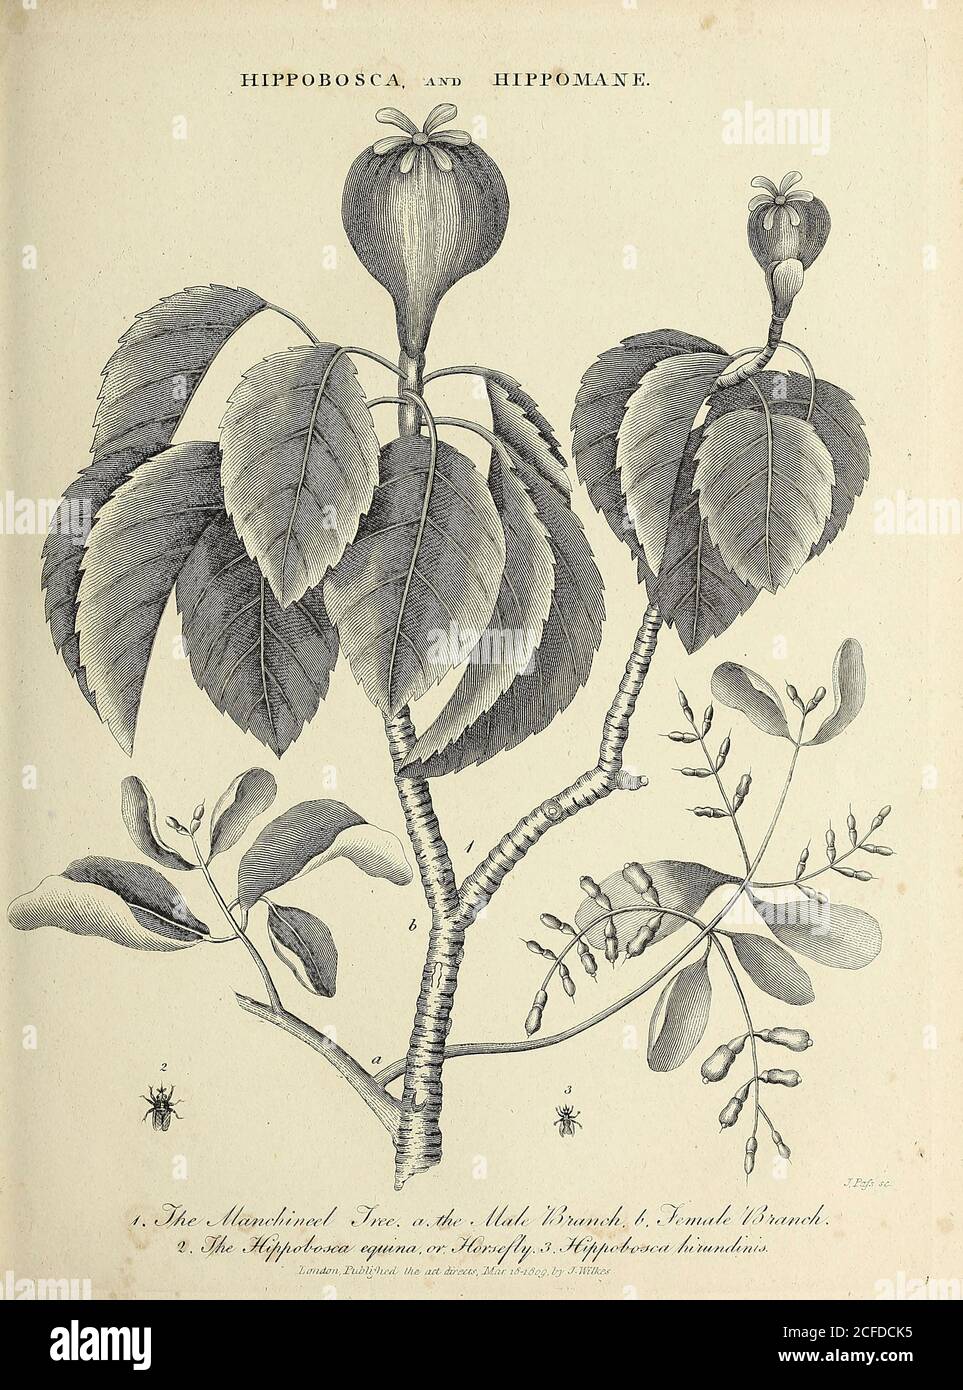 The manchineel tree (Hippomane mancinella) is a species of flowering plant in the spurge family (Euphorbiaceae). Its native range stretches from tropical southern North America to northern South America. Copperplate engraving From the Encyclopaedia Londinensis or, Universal dictionary of arts, sciences, and literature; Volume X;  Edited by Wilkes, John. Published in London in 1811 Stock Photo